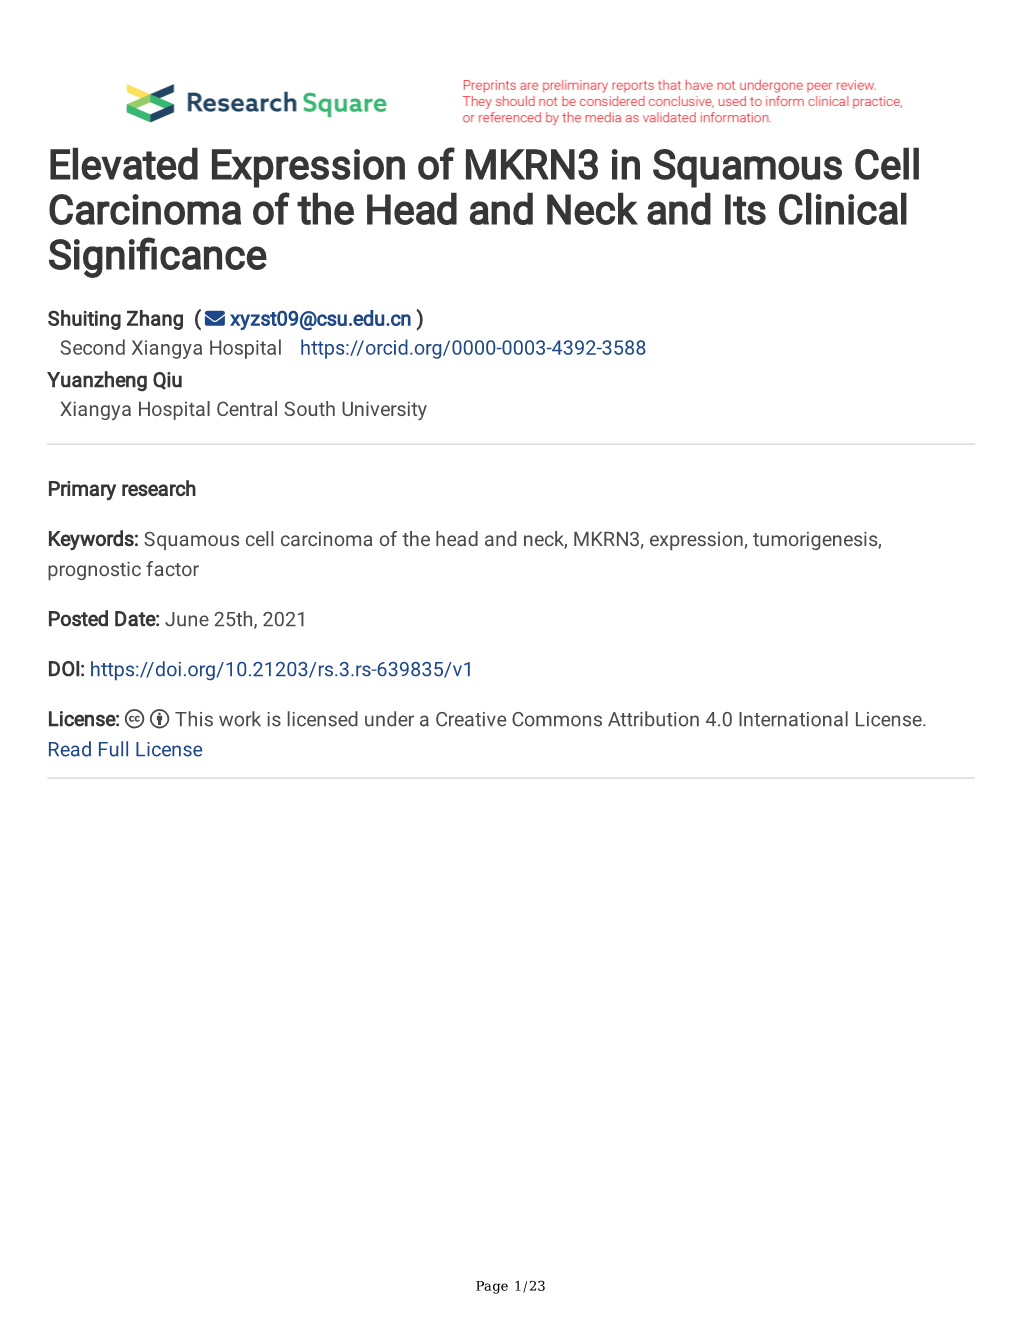 Elevated Expression of MKRN3 in Squamous Cell Carcinoma of the Head and Neck and Its Clinical Signi Cance